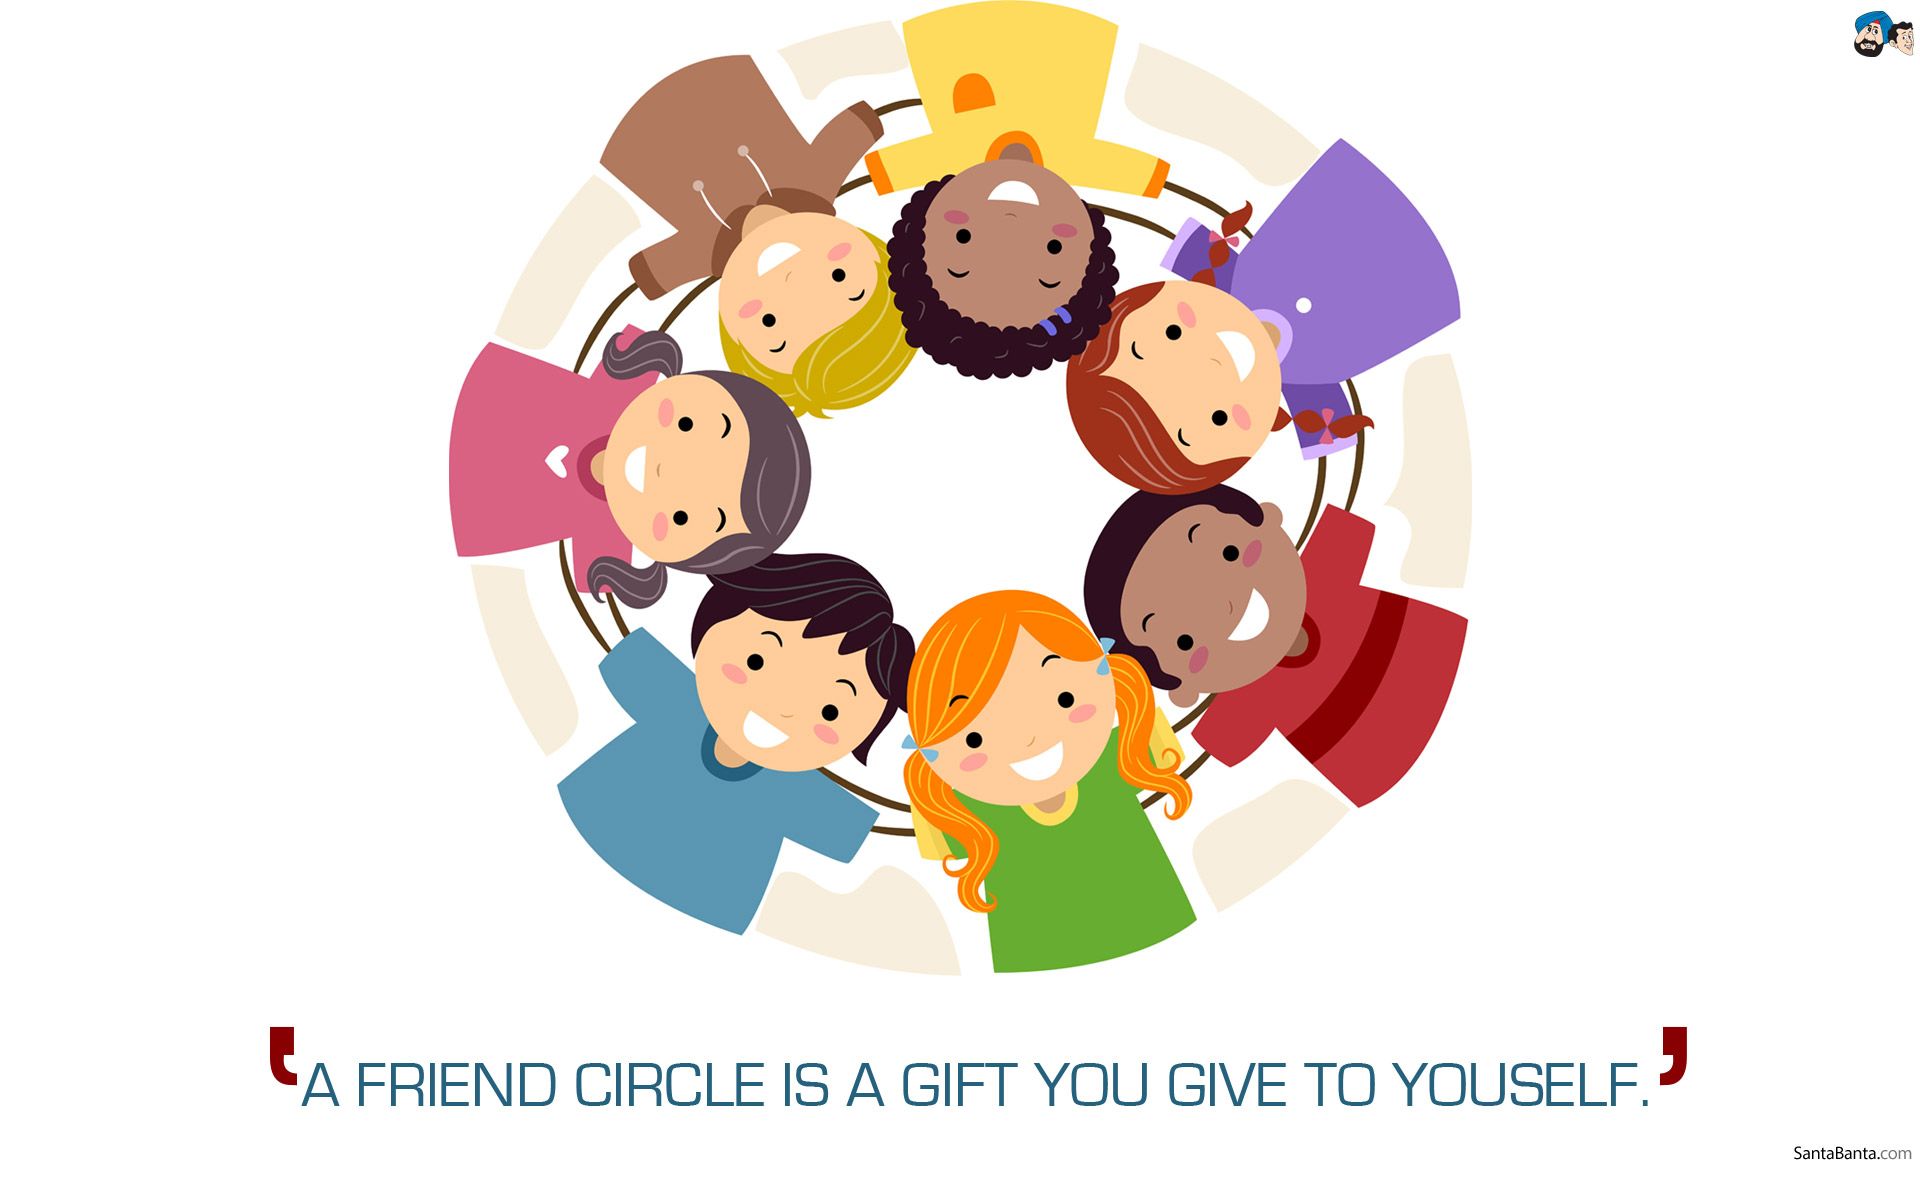 A Friend Circle Is A Gift You Give To Yourself Photo Friendship 9. Friendship Wallpaper, Happy Friendship Day, Friendship Day Wallpaper